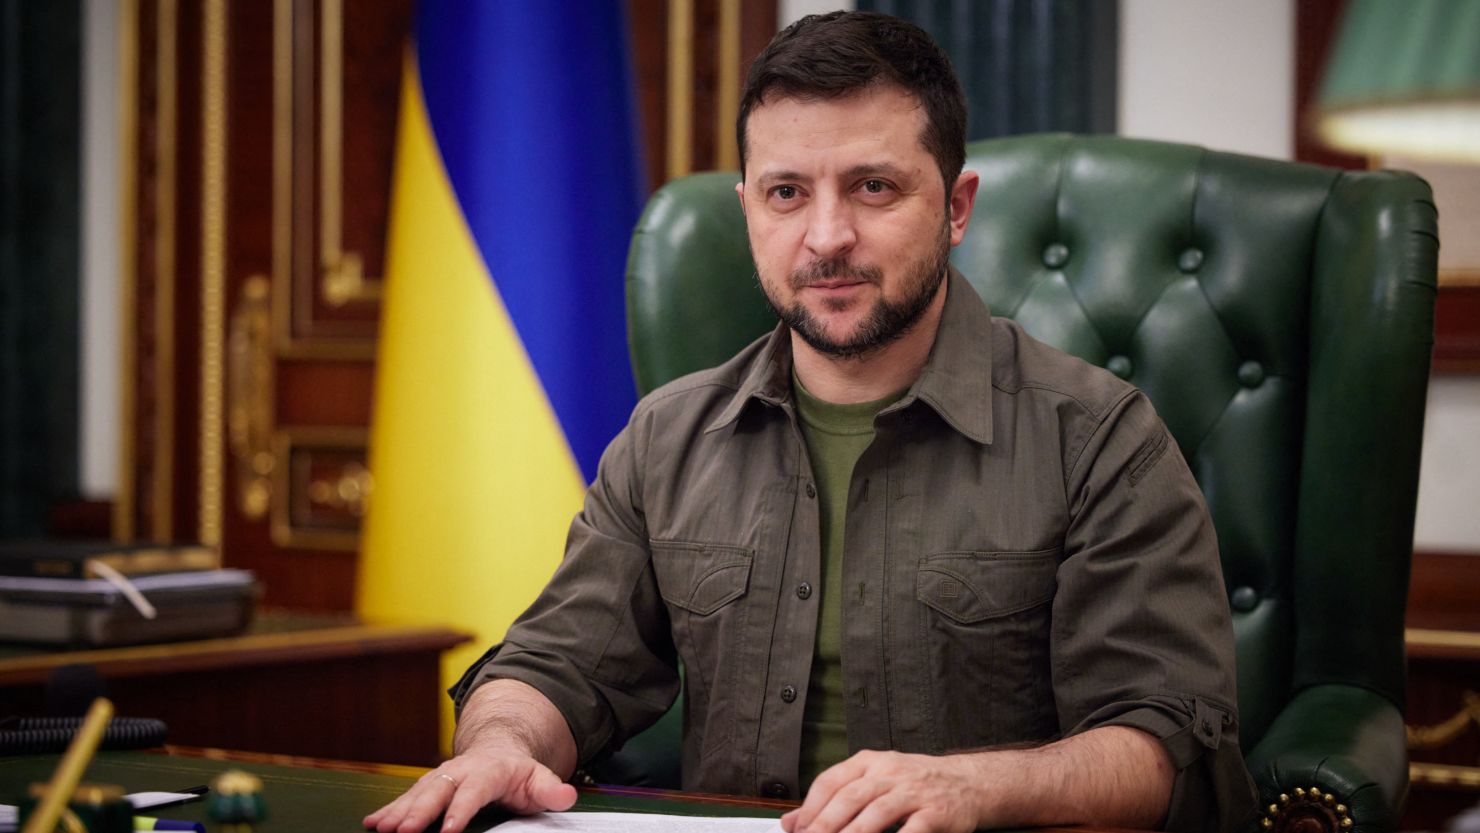 Ukraine's Zelenskiy Tells France, Germany to Provide 'Game Changing' Weapons